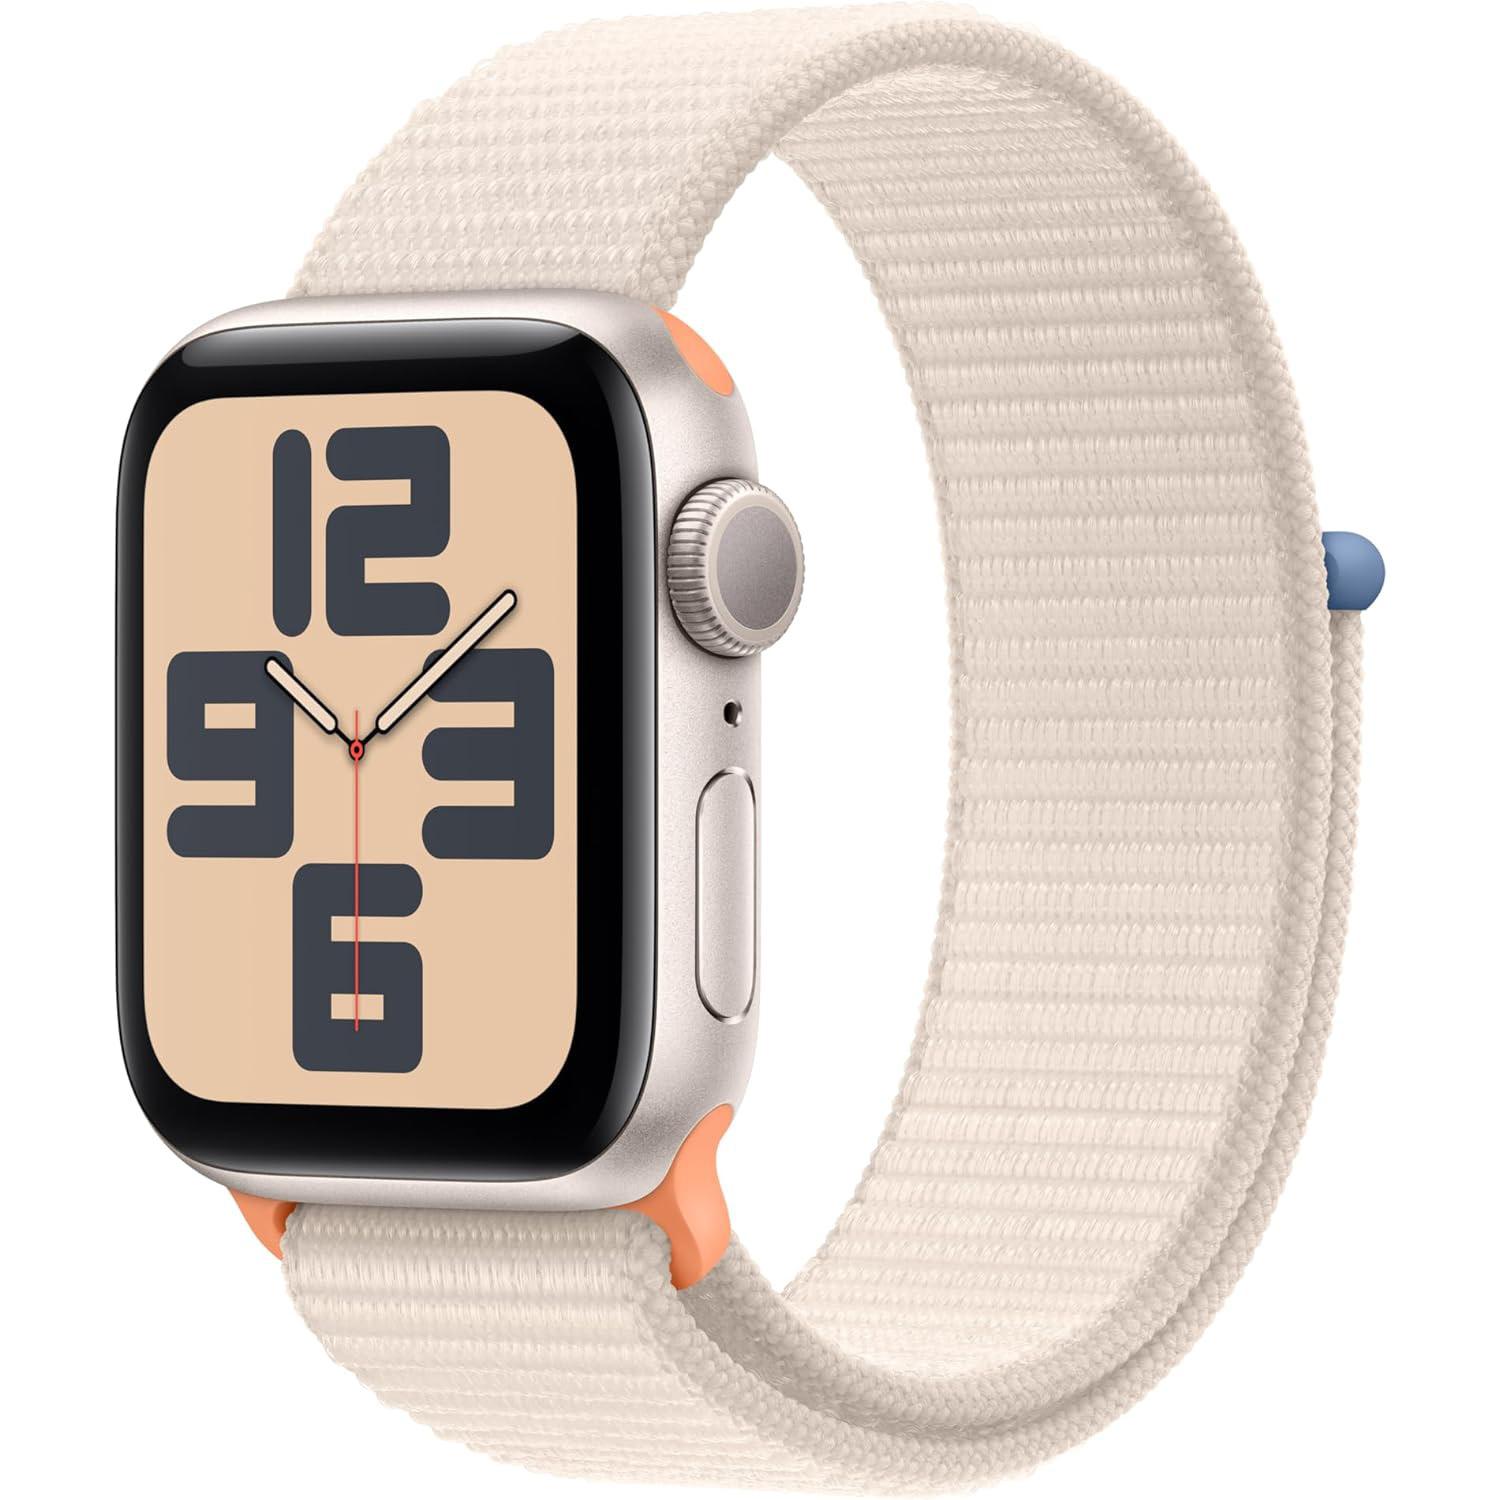 Apple Watch SE 2nd Gen GPS with Aluminum Case for $179 Shipped